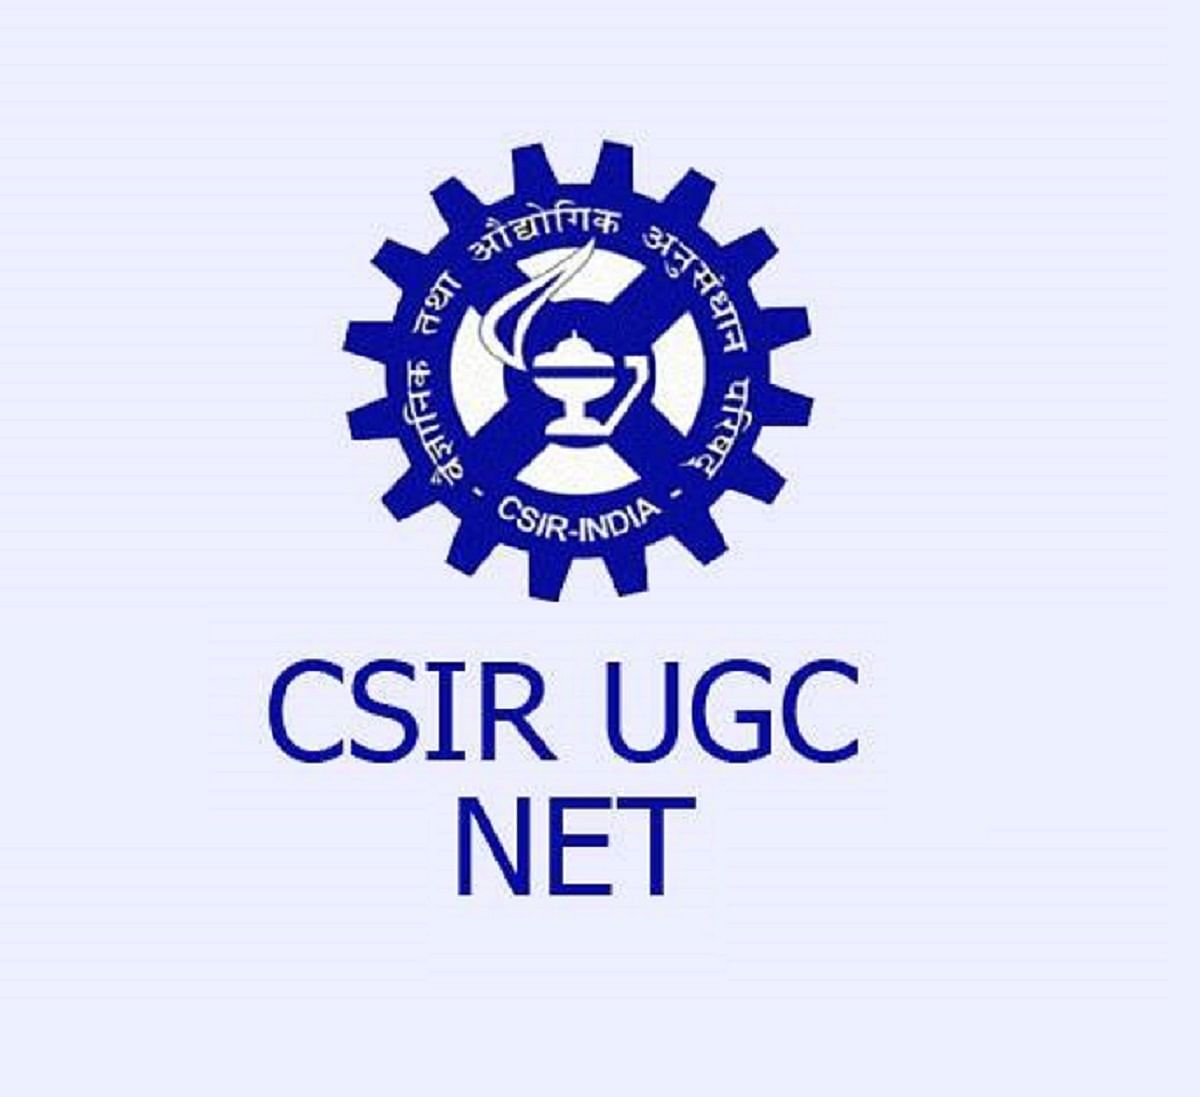 CSIR UGC NET 2019: Candidates From J&K can Apply Fom Tomorrow, Check Complete Details